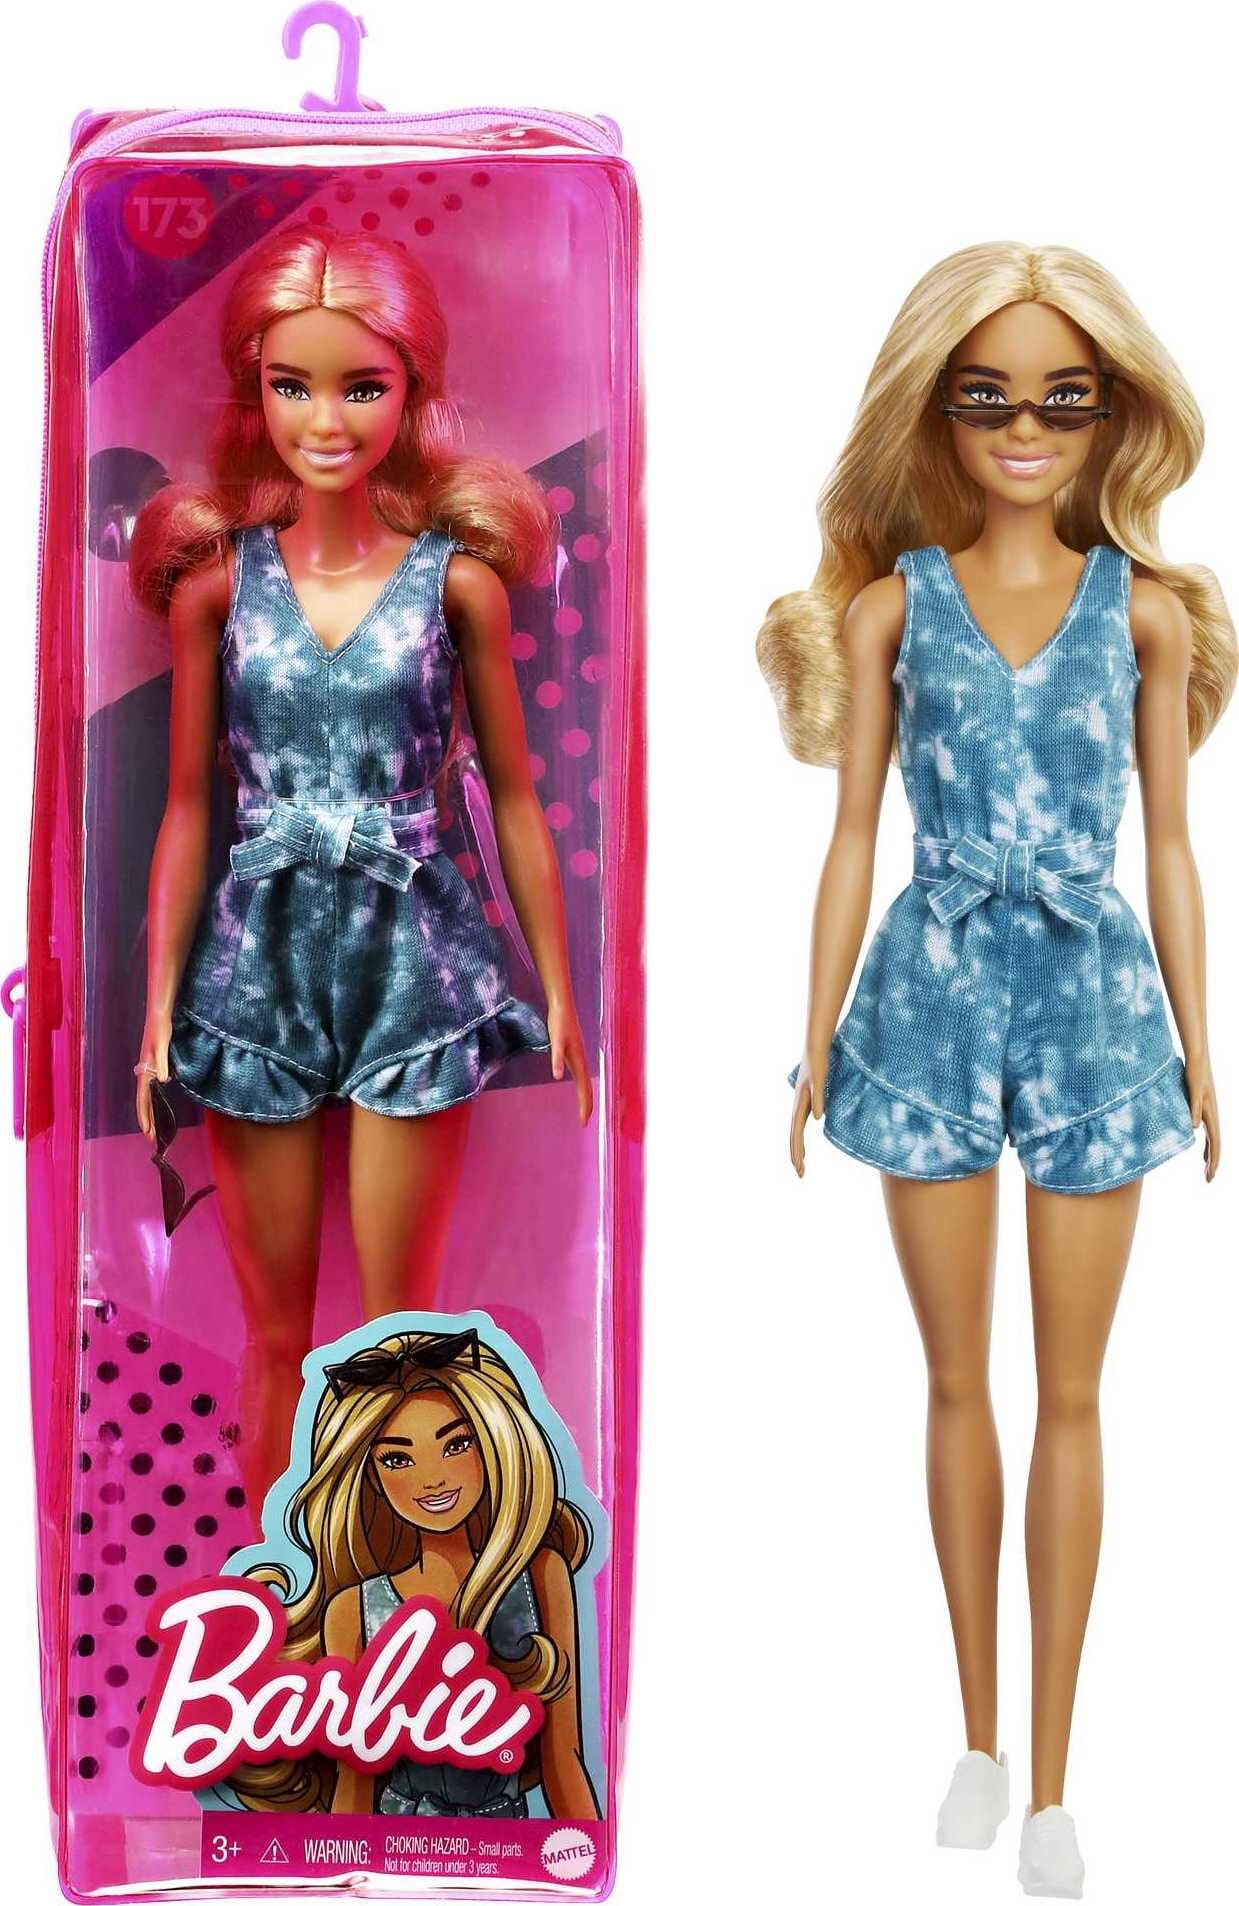 Barbie Ken Made To Move Blond Articulated Fashionista Mattel Doll 